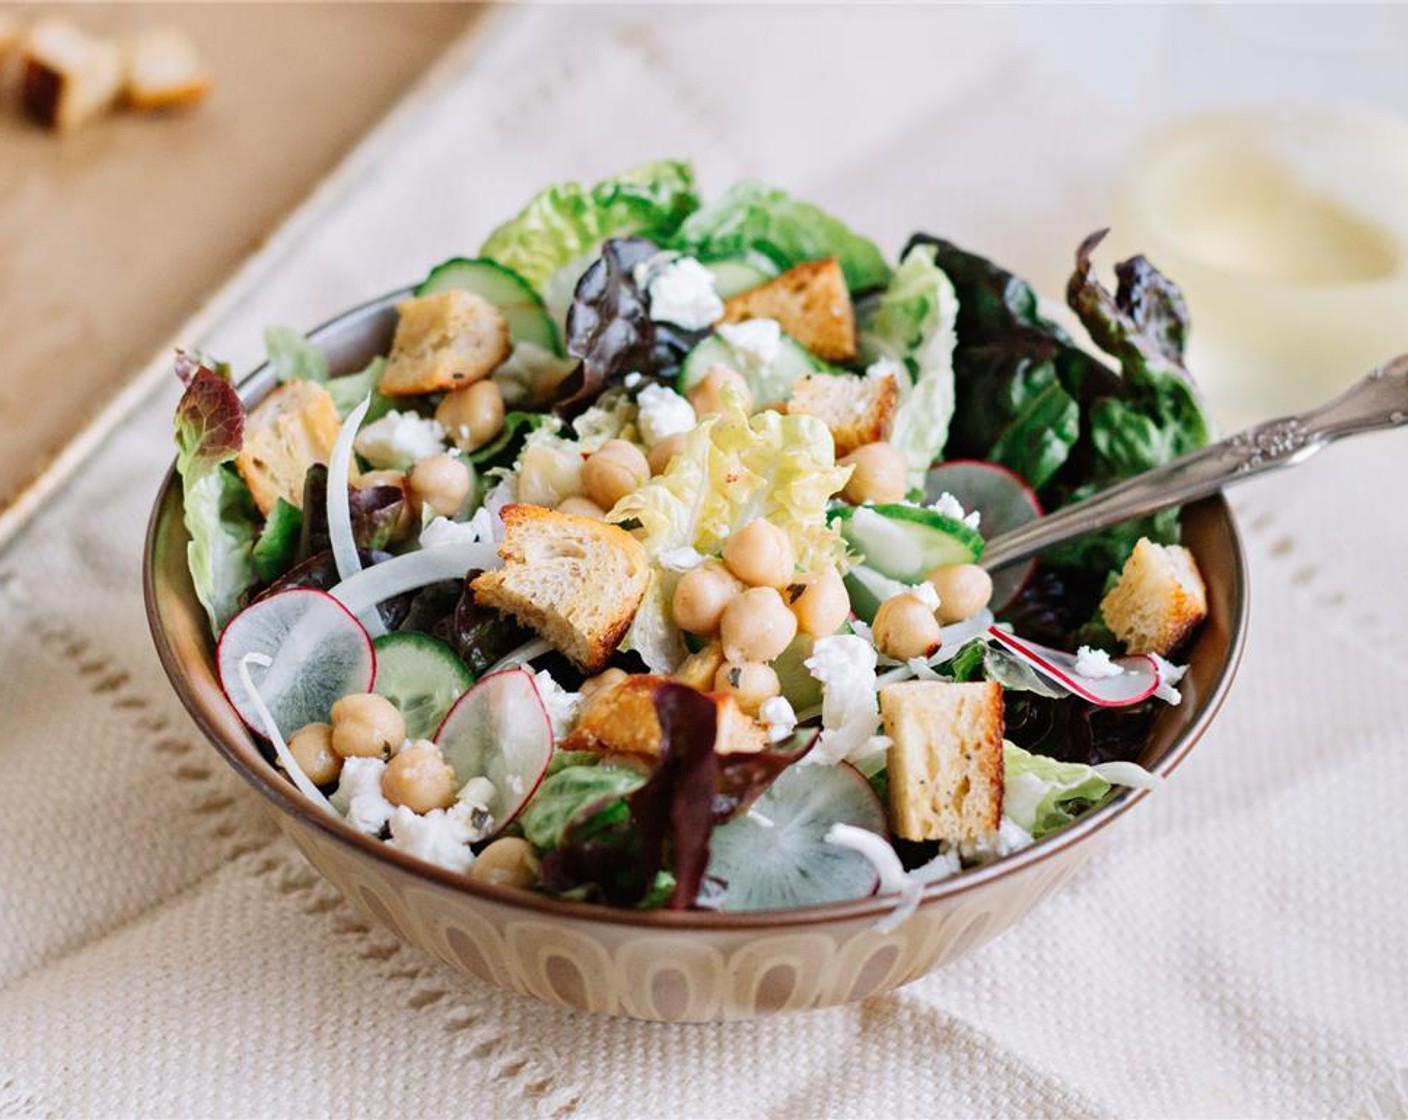 step 10 In a salad bowl, toss the sliced radishes, cucumbers, onions, lettuces, Balsamic Vinegar (2 Tbsp) and Olive Oil (1 Tbsp). Season with salt and pepper to taste. Divide into bowls and top with marinated chickpeas, Crumbled Feta Cheese (1/2 cup) and croutons. Serve and enjoy!